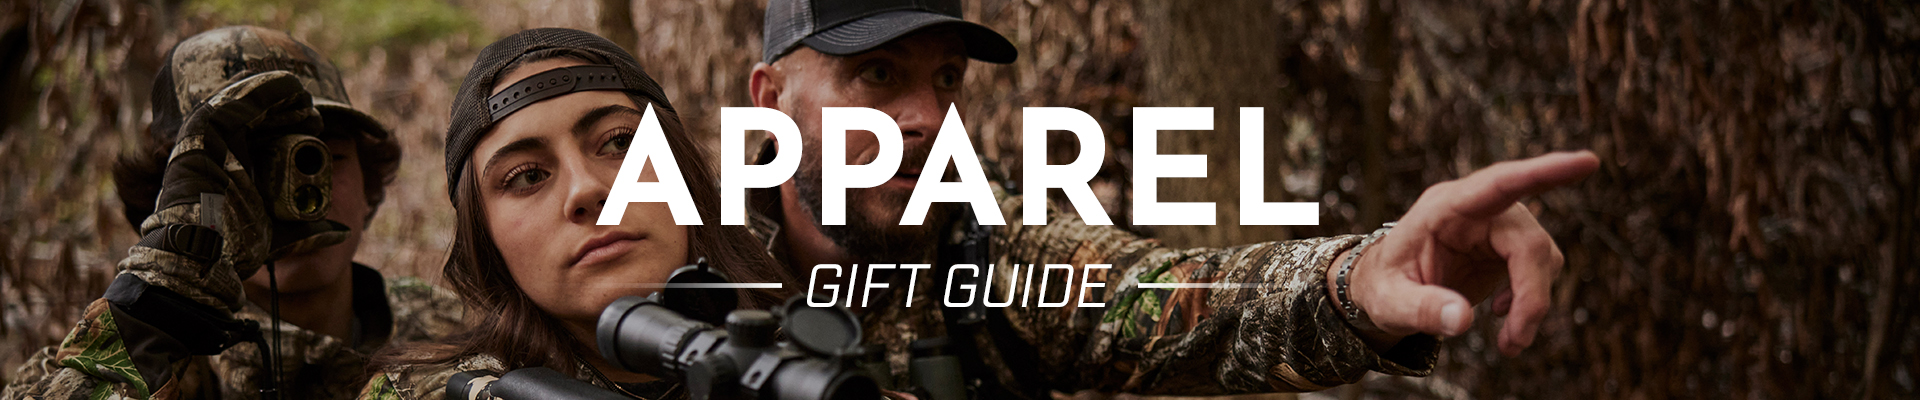 Apparel Gift Guide